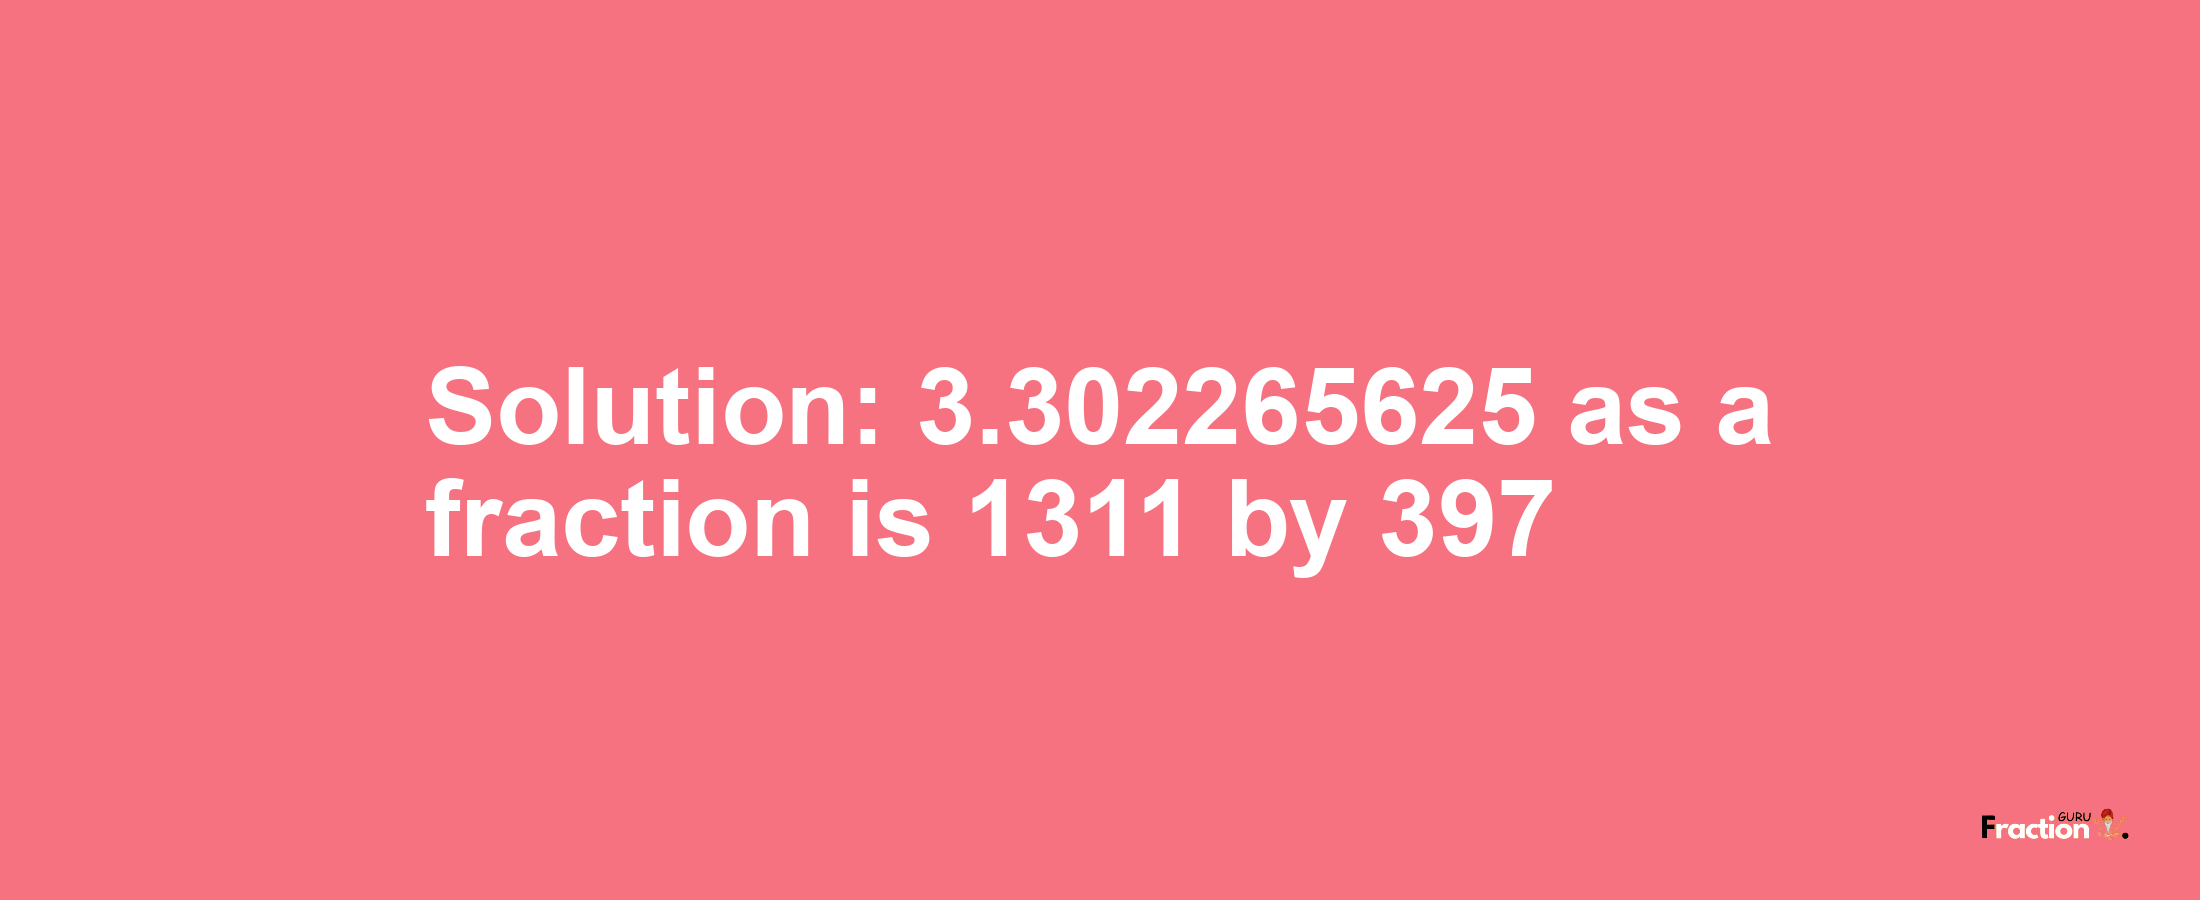 Solution:3.302265625 as a fraction is 1311/397